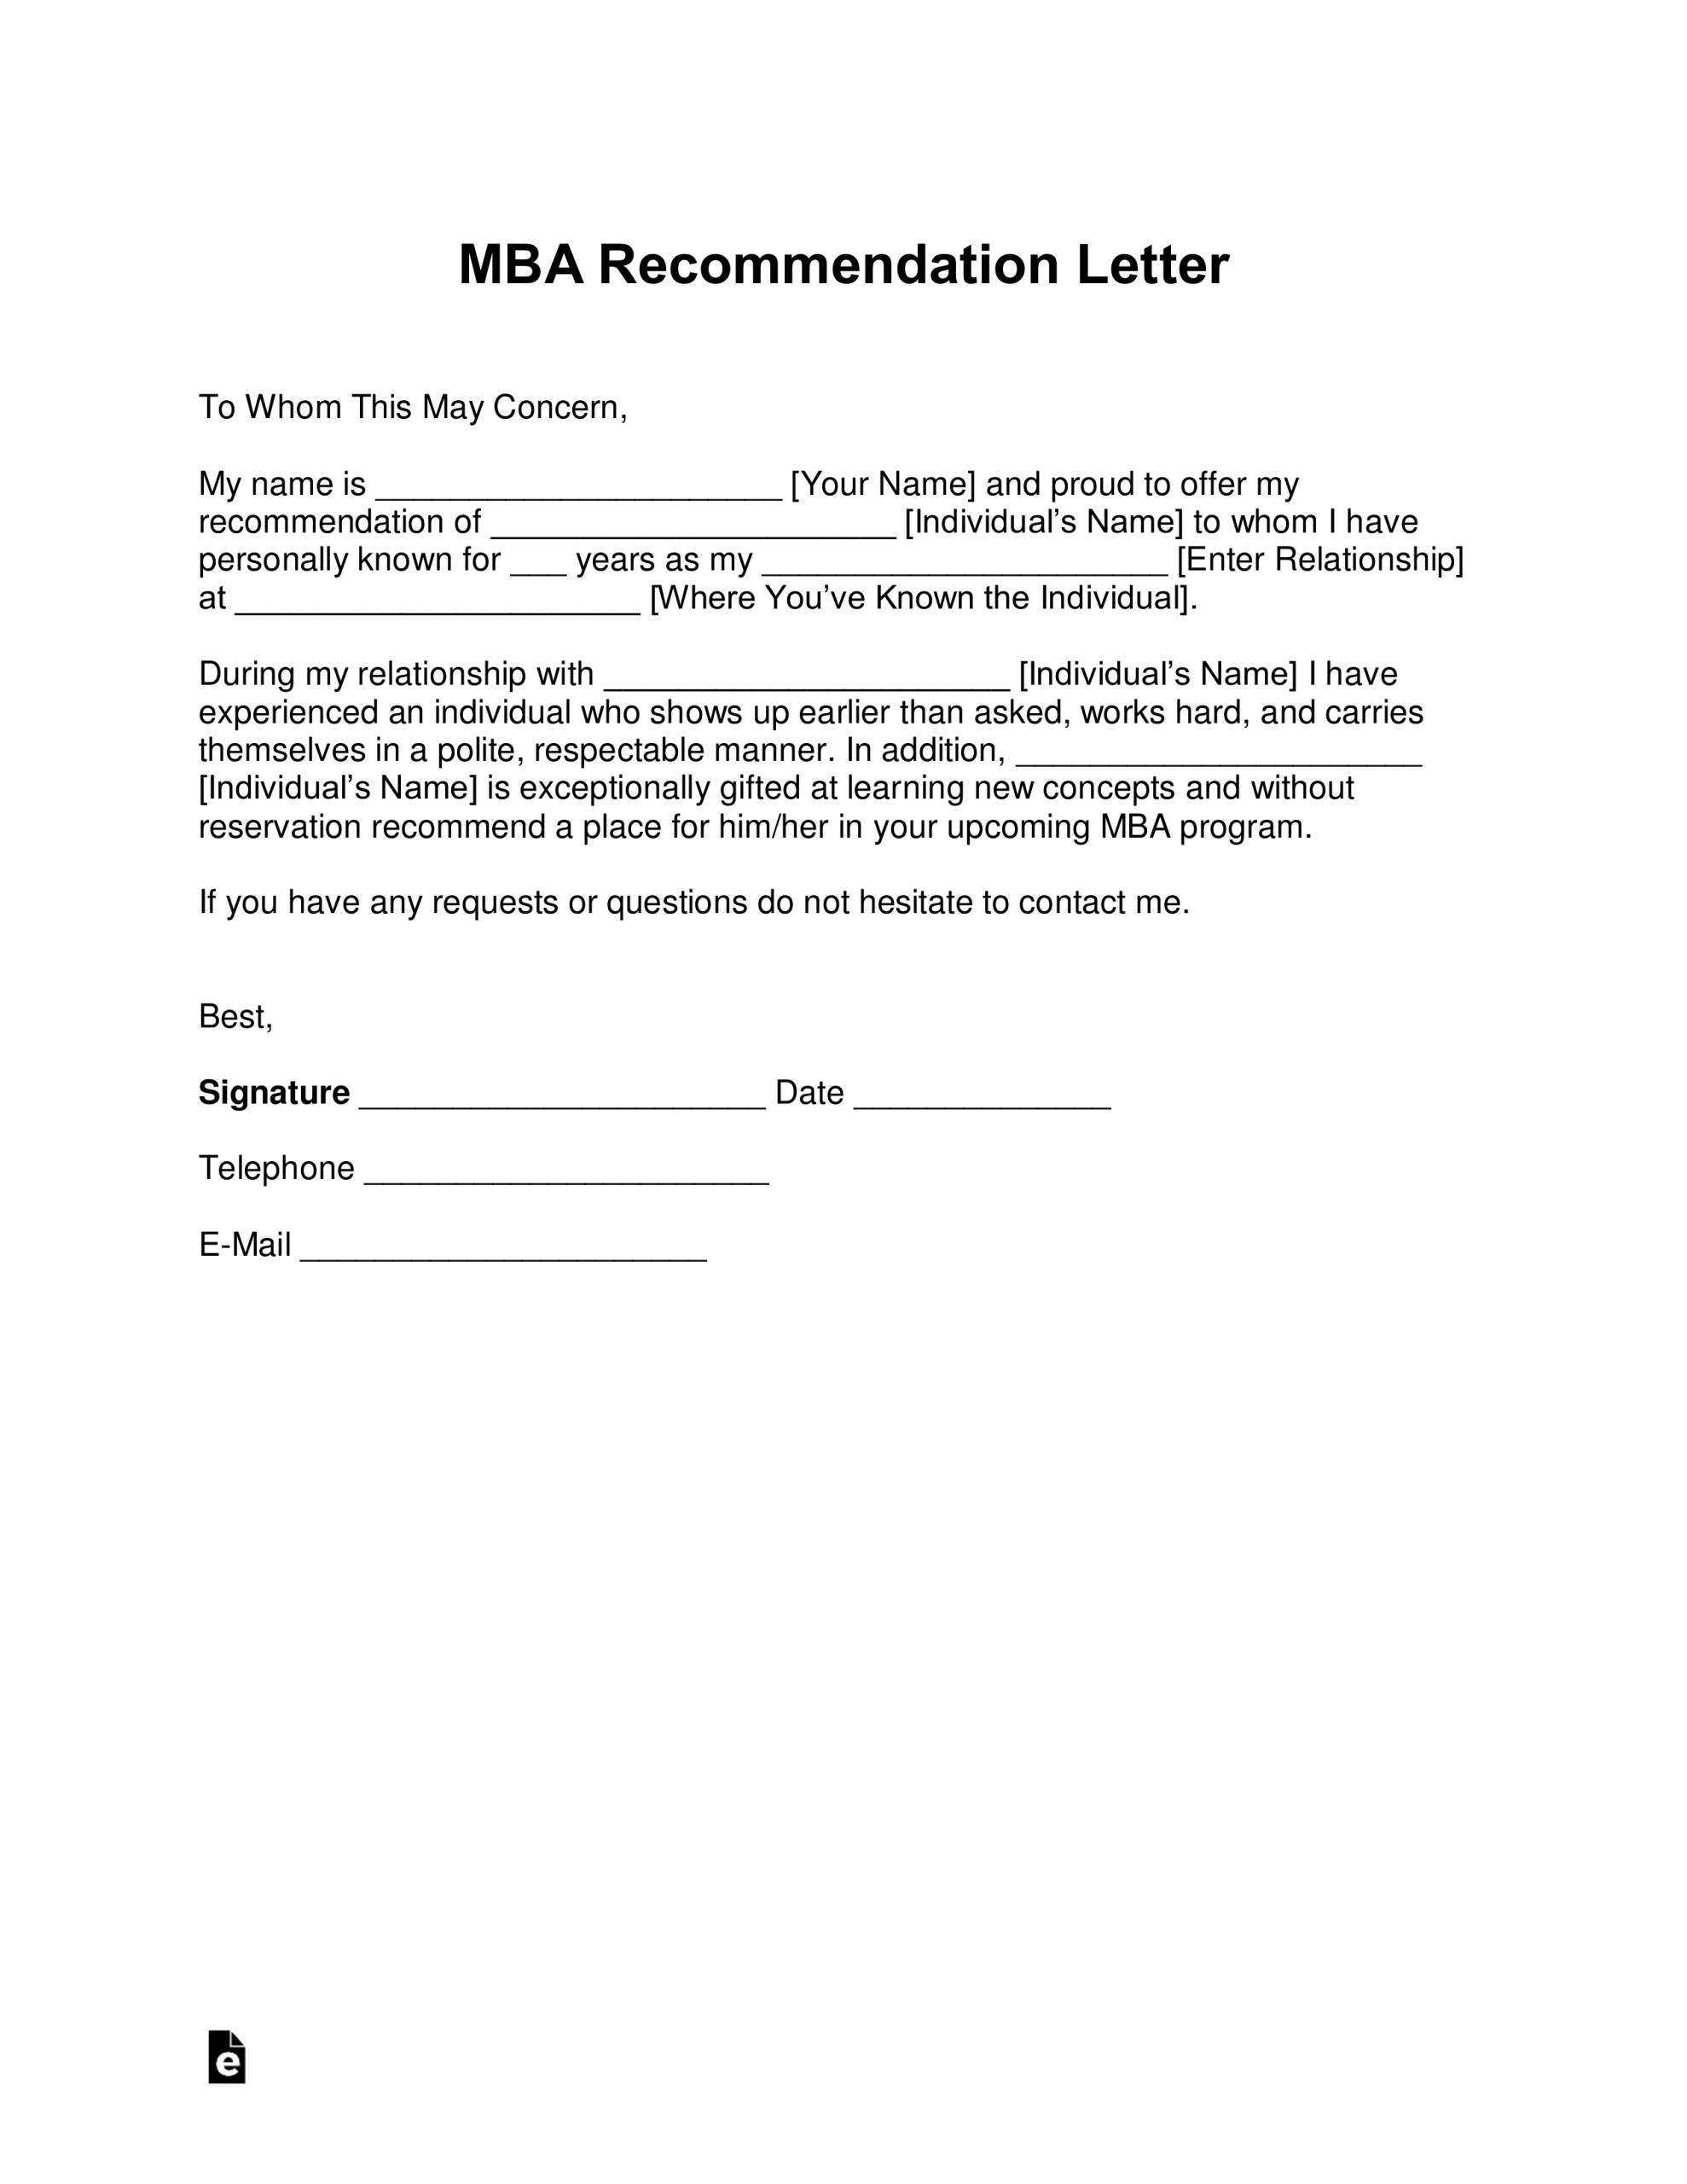 Free Mba Letter Of Recommendation Template With Samples intended for dimensions 2550 X 3301